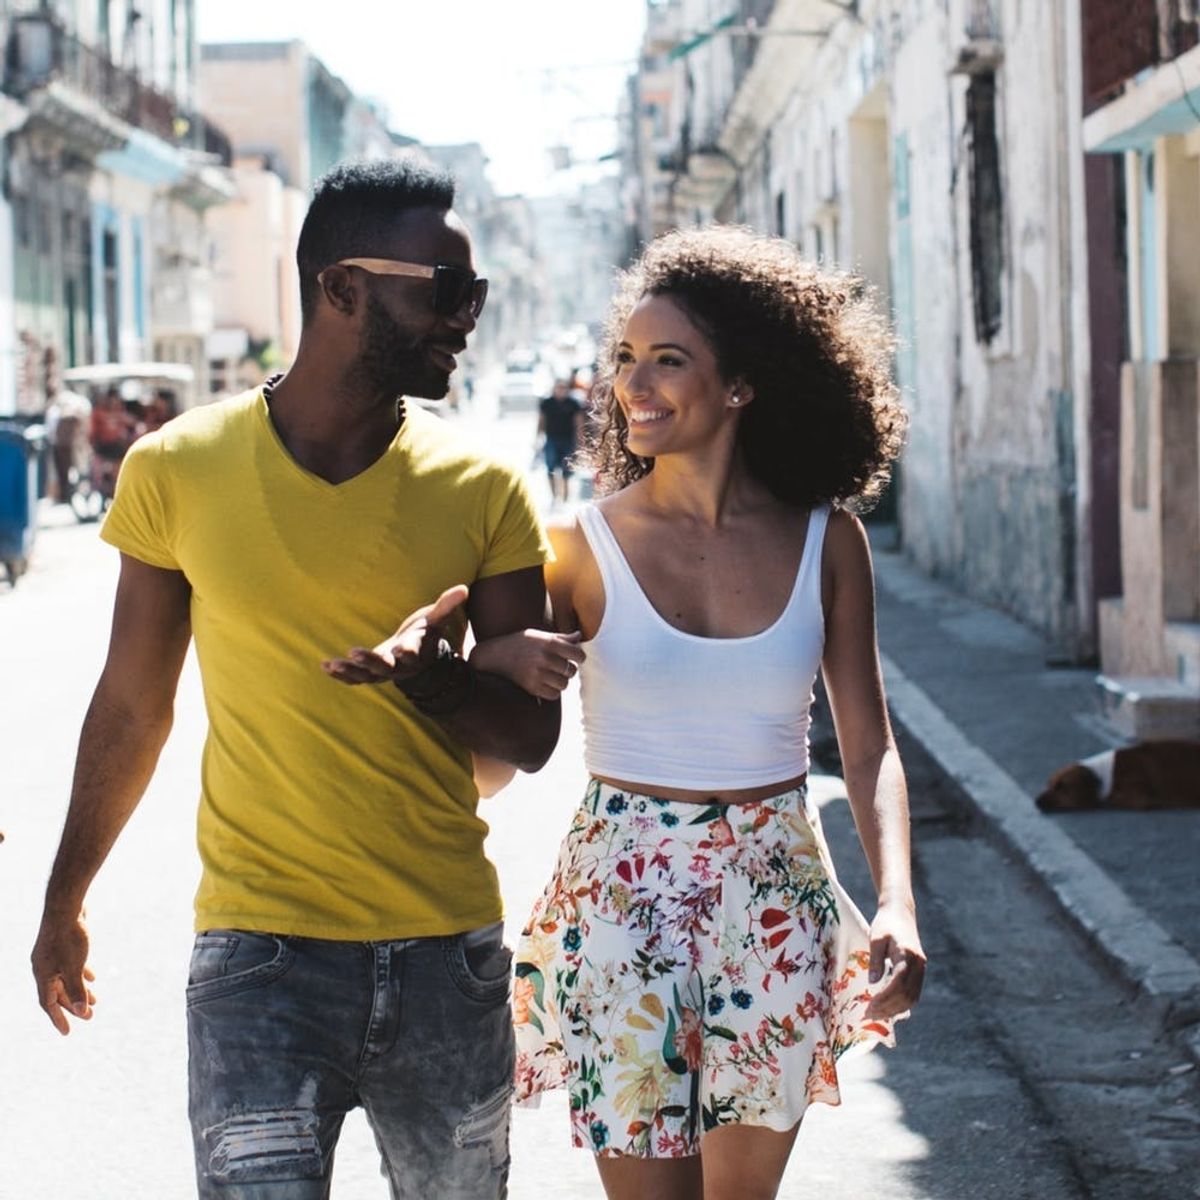 Checking Off Your Bucket List Could Help You Find Love This Summer